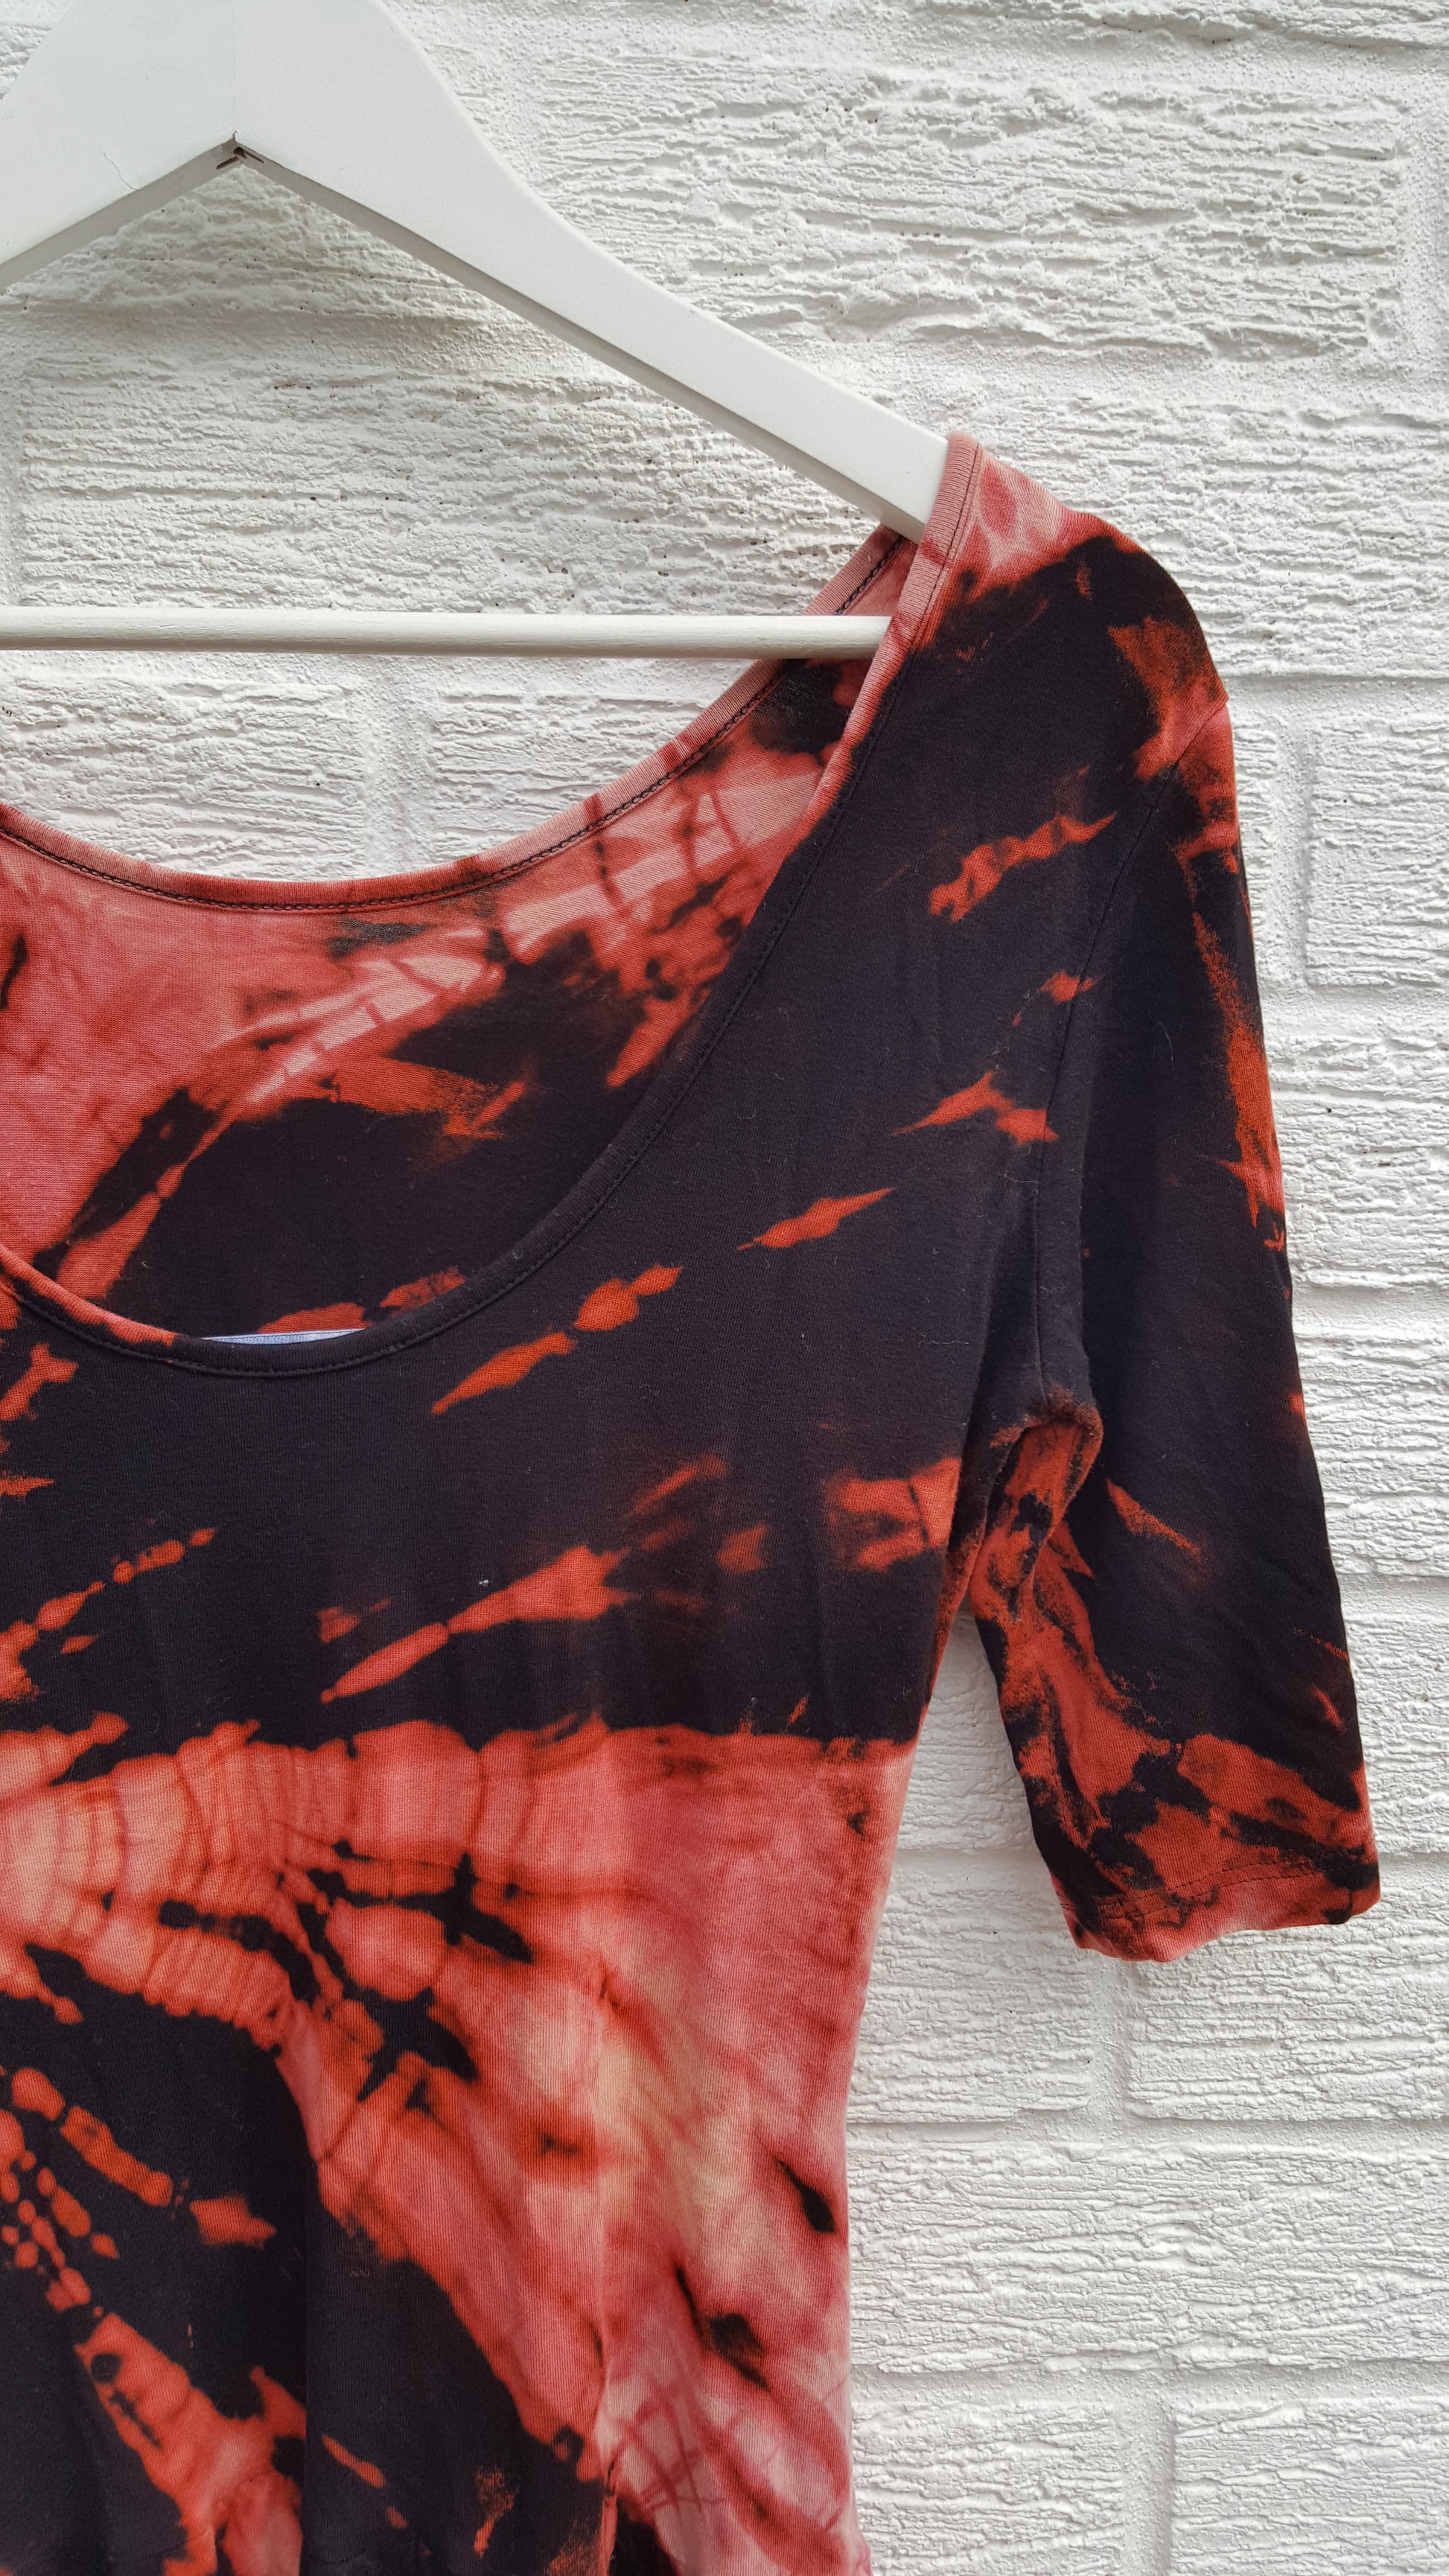 Bleached Shibori style tie dye dress in black & peach shades, jersey fabric mini dress with short sleeves and low back, to fit UK Size 10 or US size 6.  This beautiful one of a kind dress was thrifted and upcycled in the UK, so it's not just one of a kind! It's also sustainable & friendly to the environment too! Hand dyed with love by AbiDashery. BE QUICK - THIS IS A ONE OFF UPCYCLE & THERE'S ONLY ONE AVAILABLE!